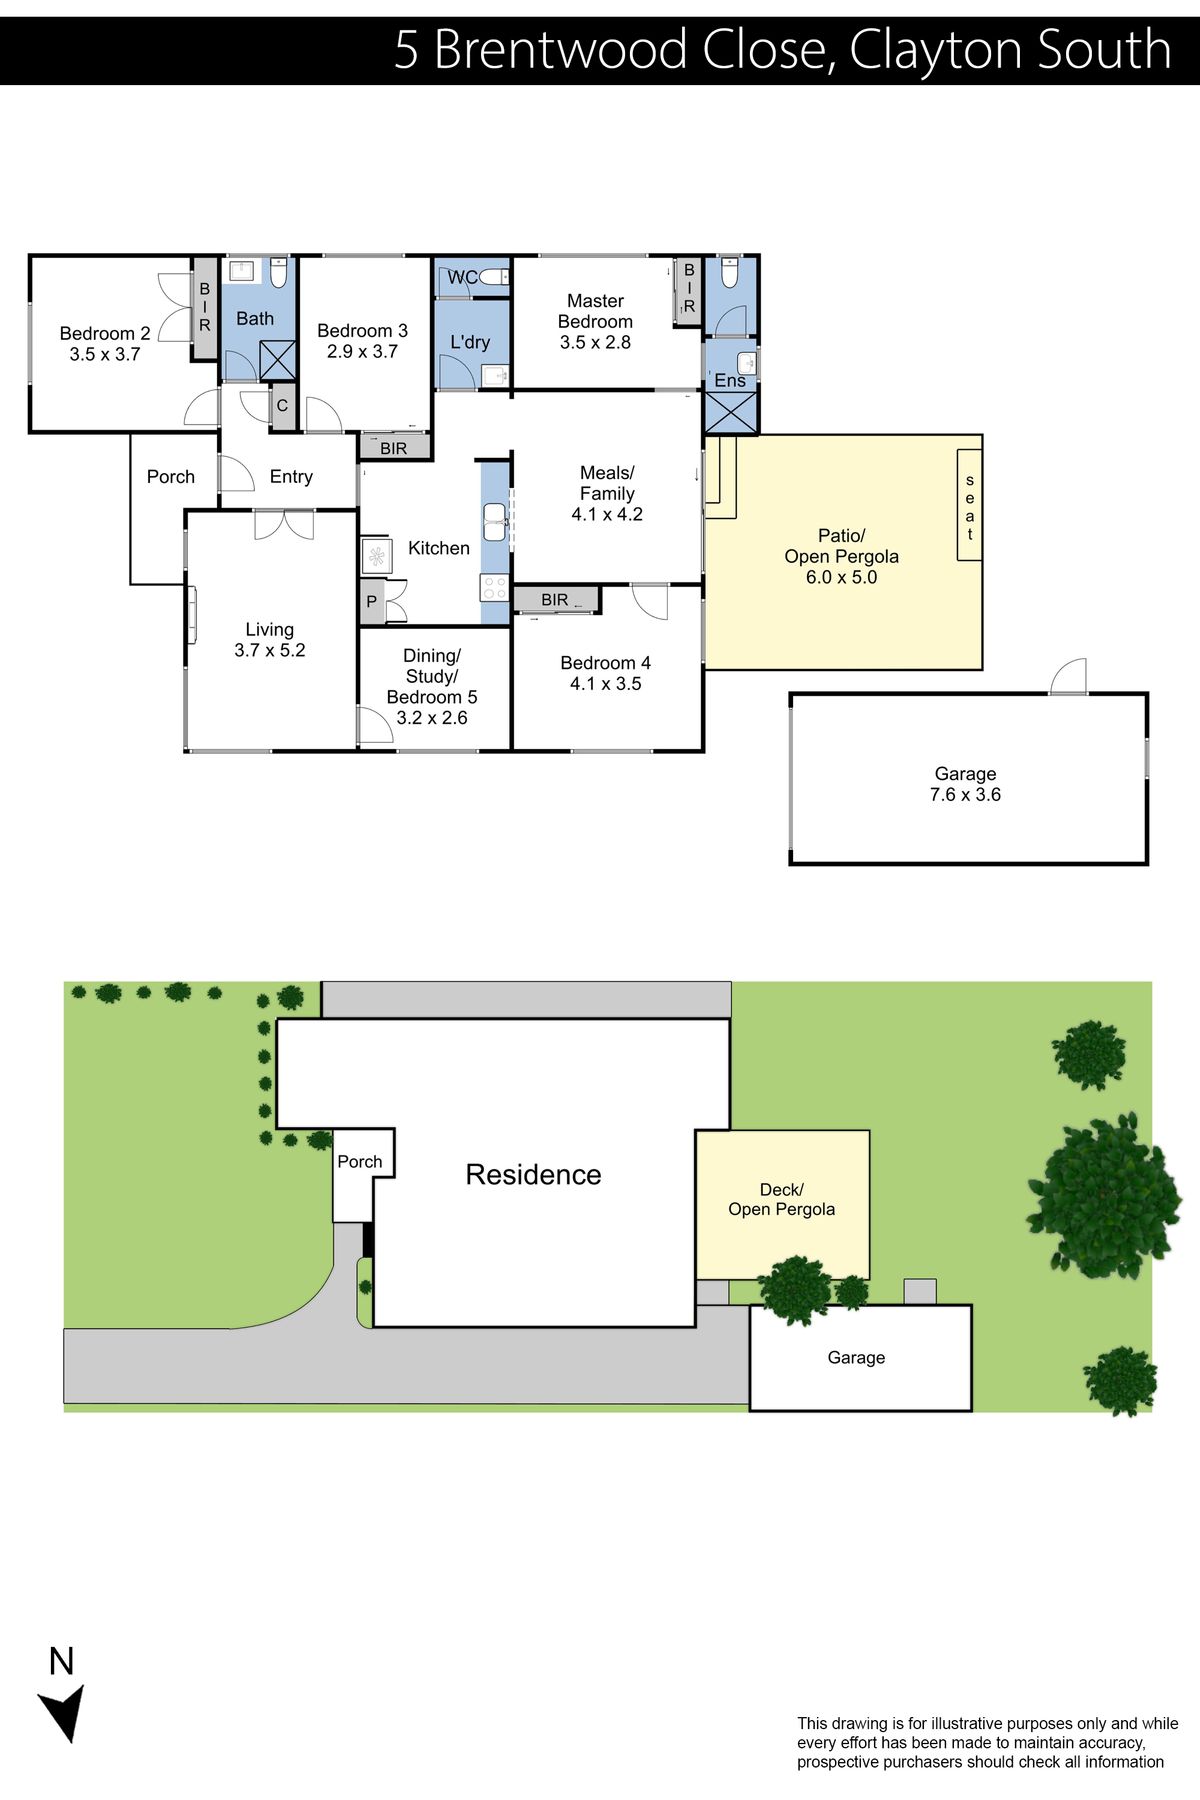 5 Brentwood Close Plans